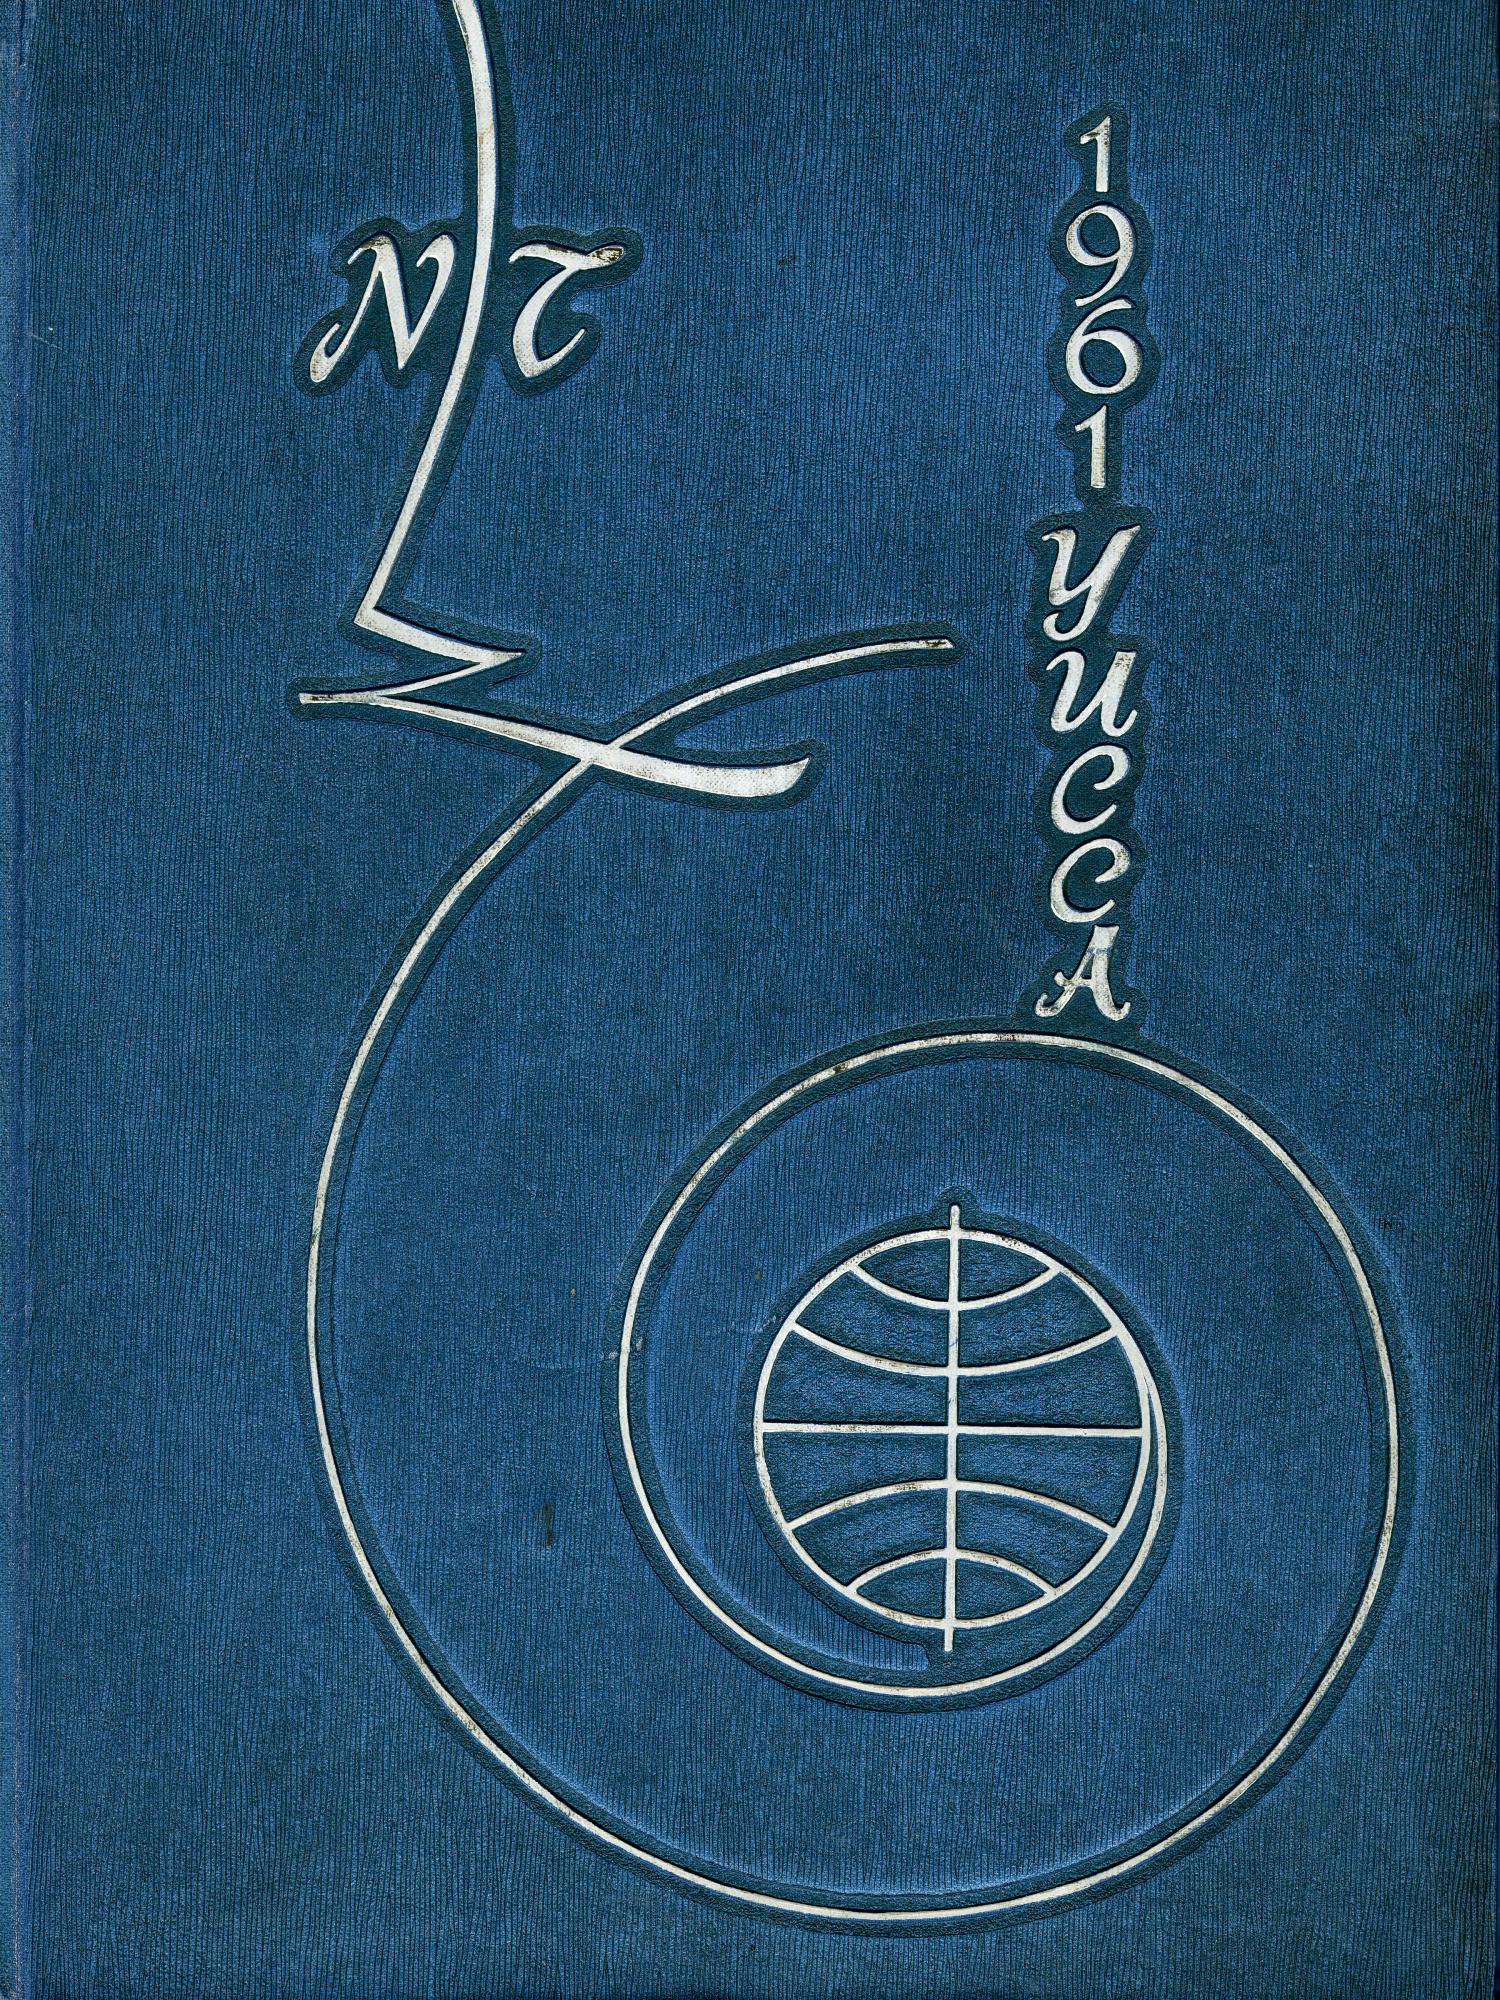 The Yucca, Yearbook of North Texas State College, 1961
                                                
                                                    Front Cover
                                                